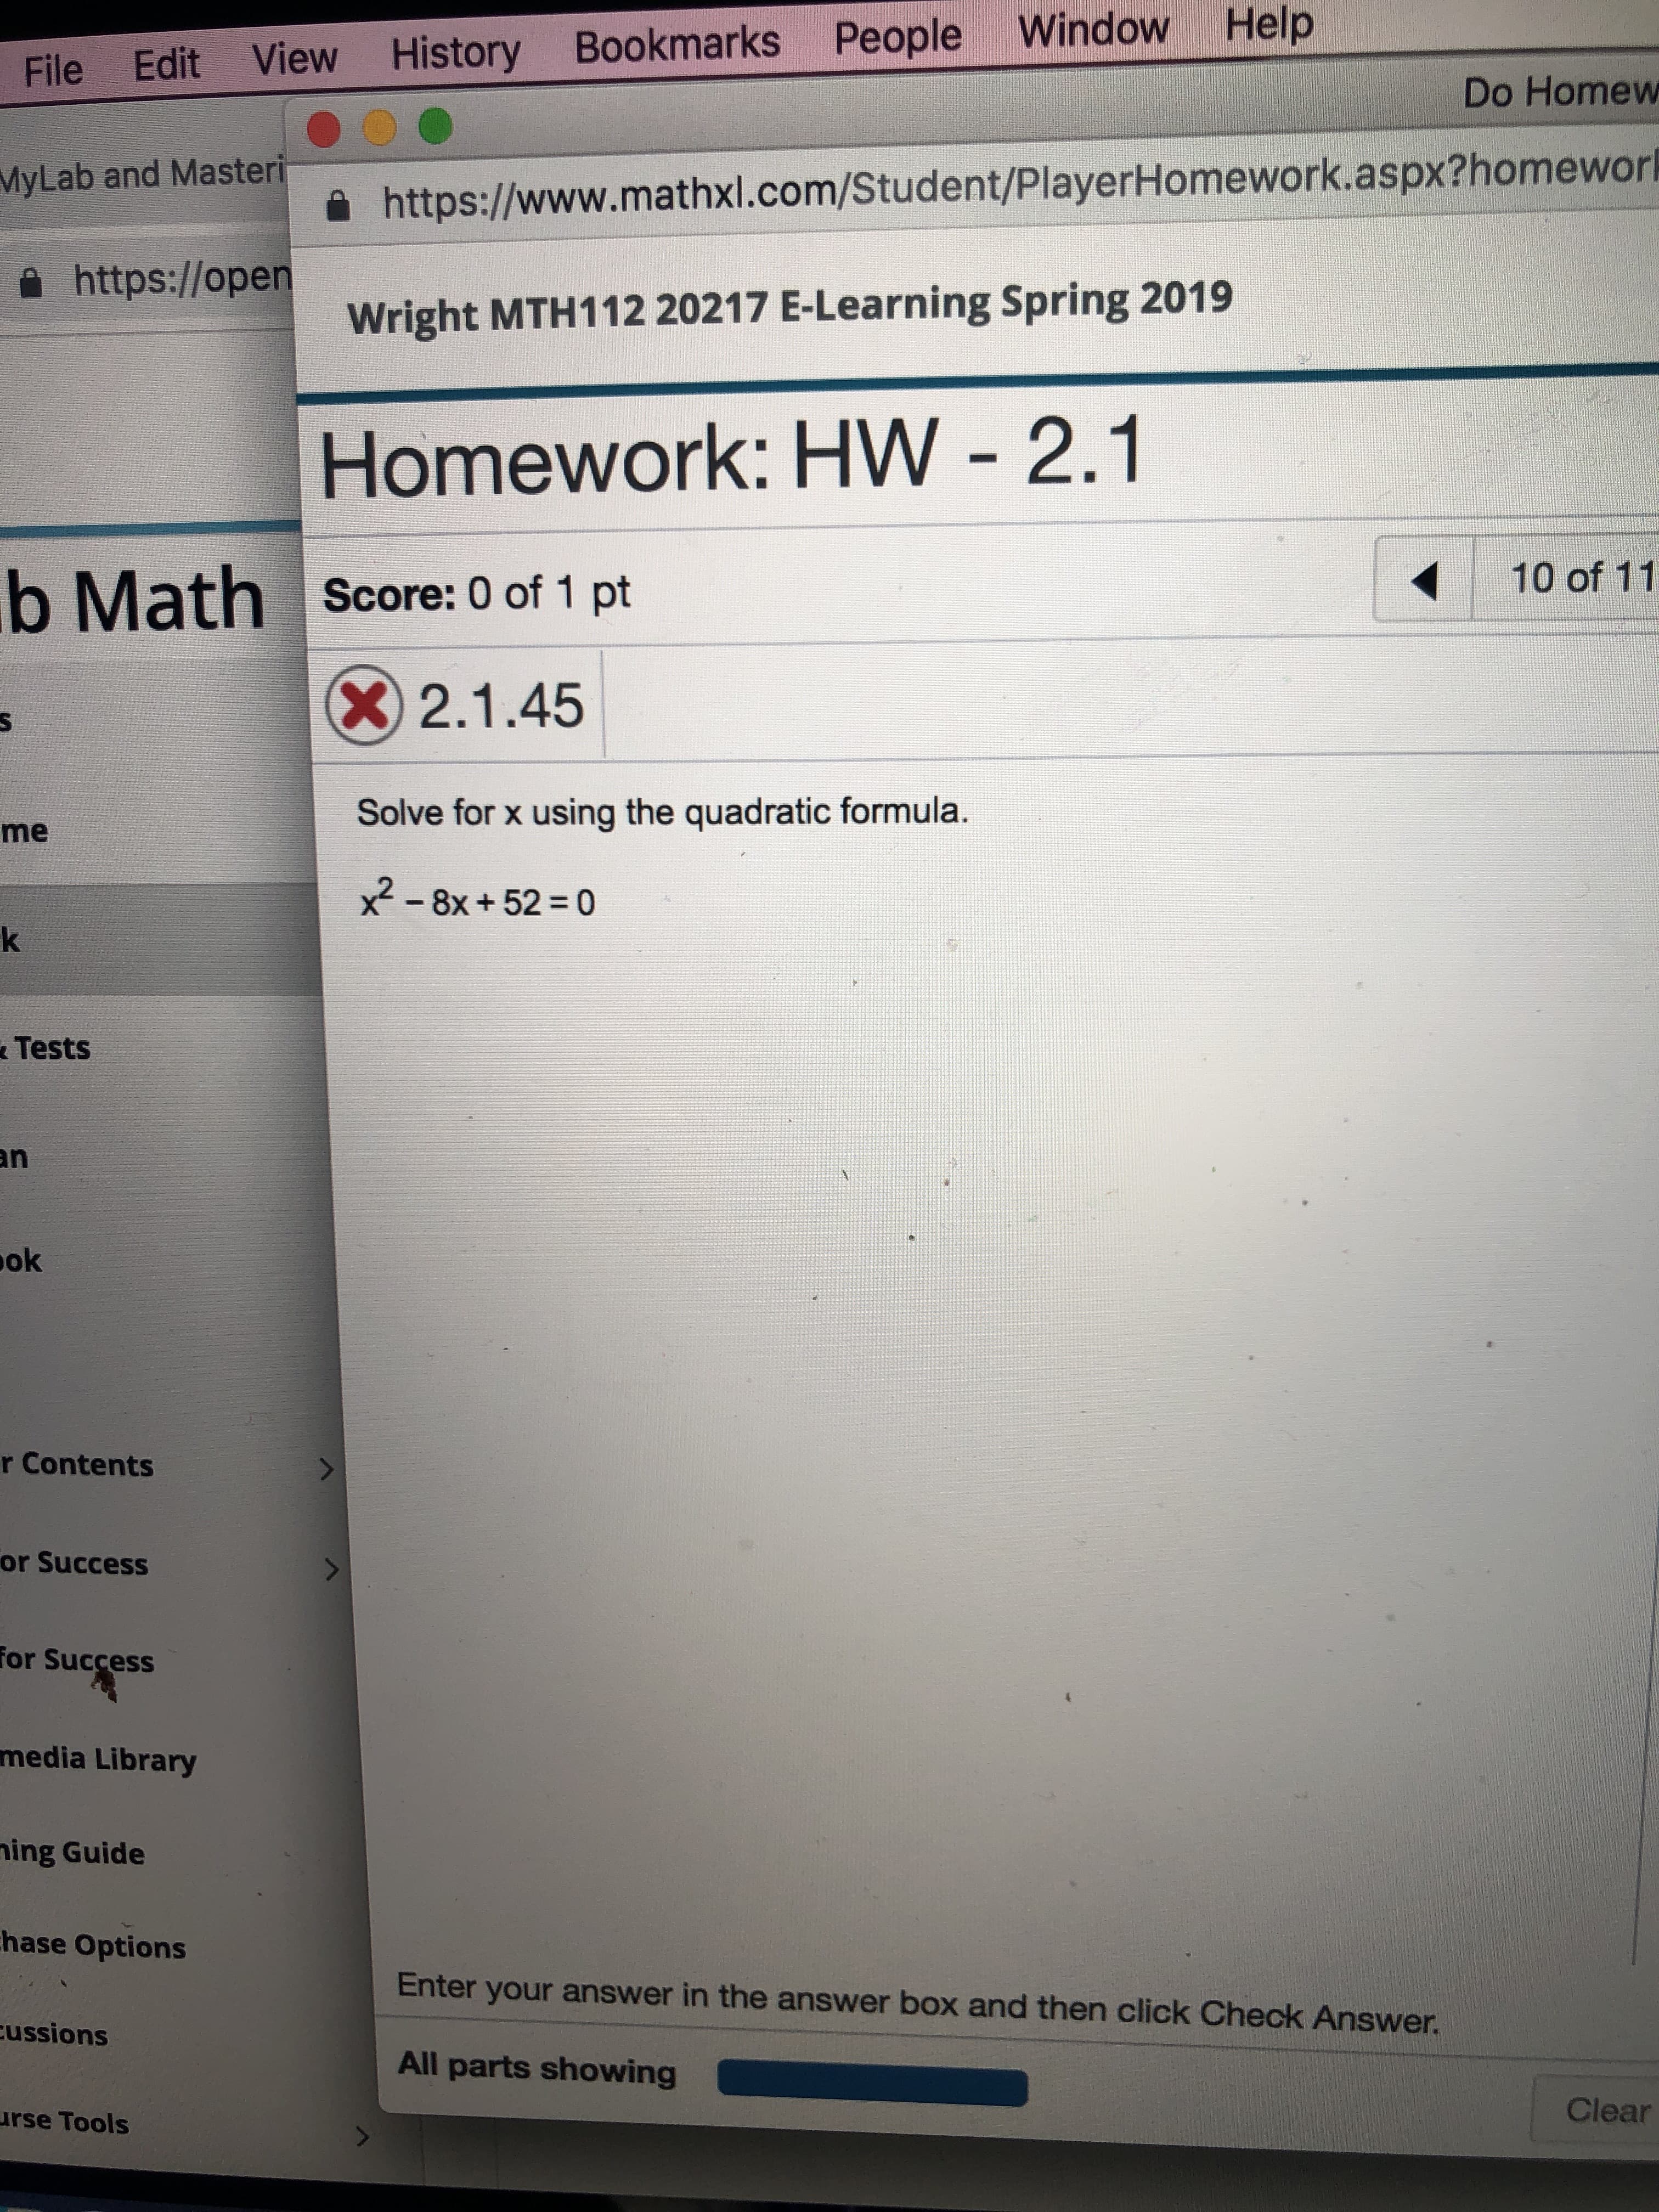 File Edit View History Bookmarks People Window Help
MyLab and Masteri
a https://open
Do Homew
을 https://www.mathxl.com/Student/PlayerHomework.aspx?homewor
Wright MTH112 20217 E-Learning Spring 2019
Homework: HW 2.1
b Math Score: 0 of 1 pt
10 of 11
X 2.1.45
Solve for x using the quadratic formula.
x2-8x + 52 = 0
me
Tests
ok
r Contents
or Success
for Success
media Library
ing Guide
hase Options
Enter your answer in the answer box and then click Check Answer.
ussions
All parts showing
rse Tools
Clear
